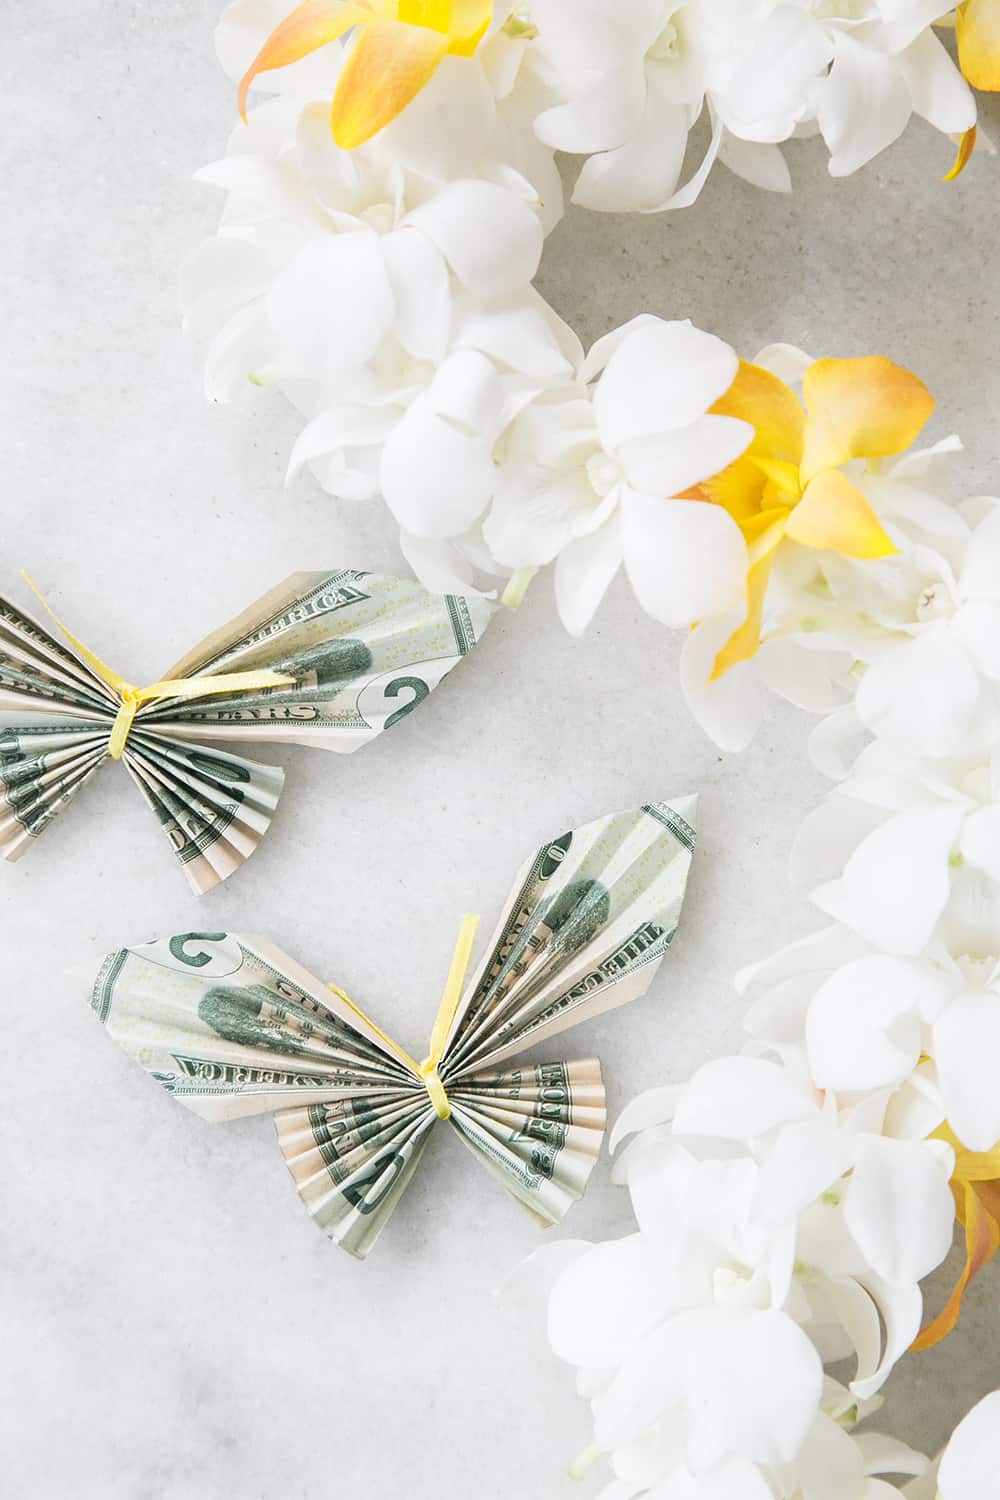 money origami butterfly on a table - dollar bills, money lei, butterfly money, dollar bill, graduation gift